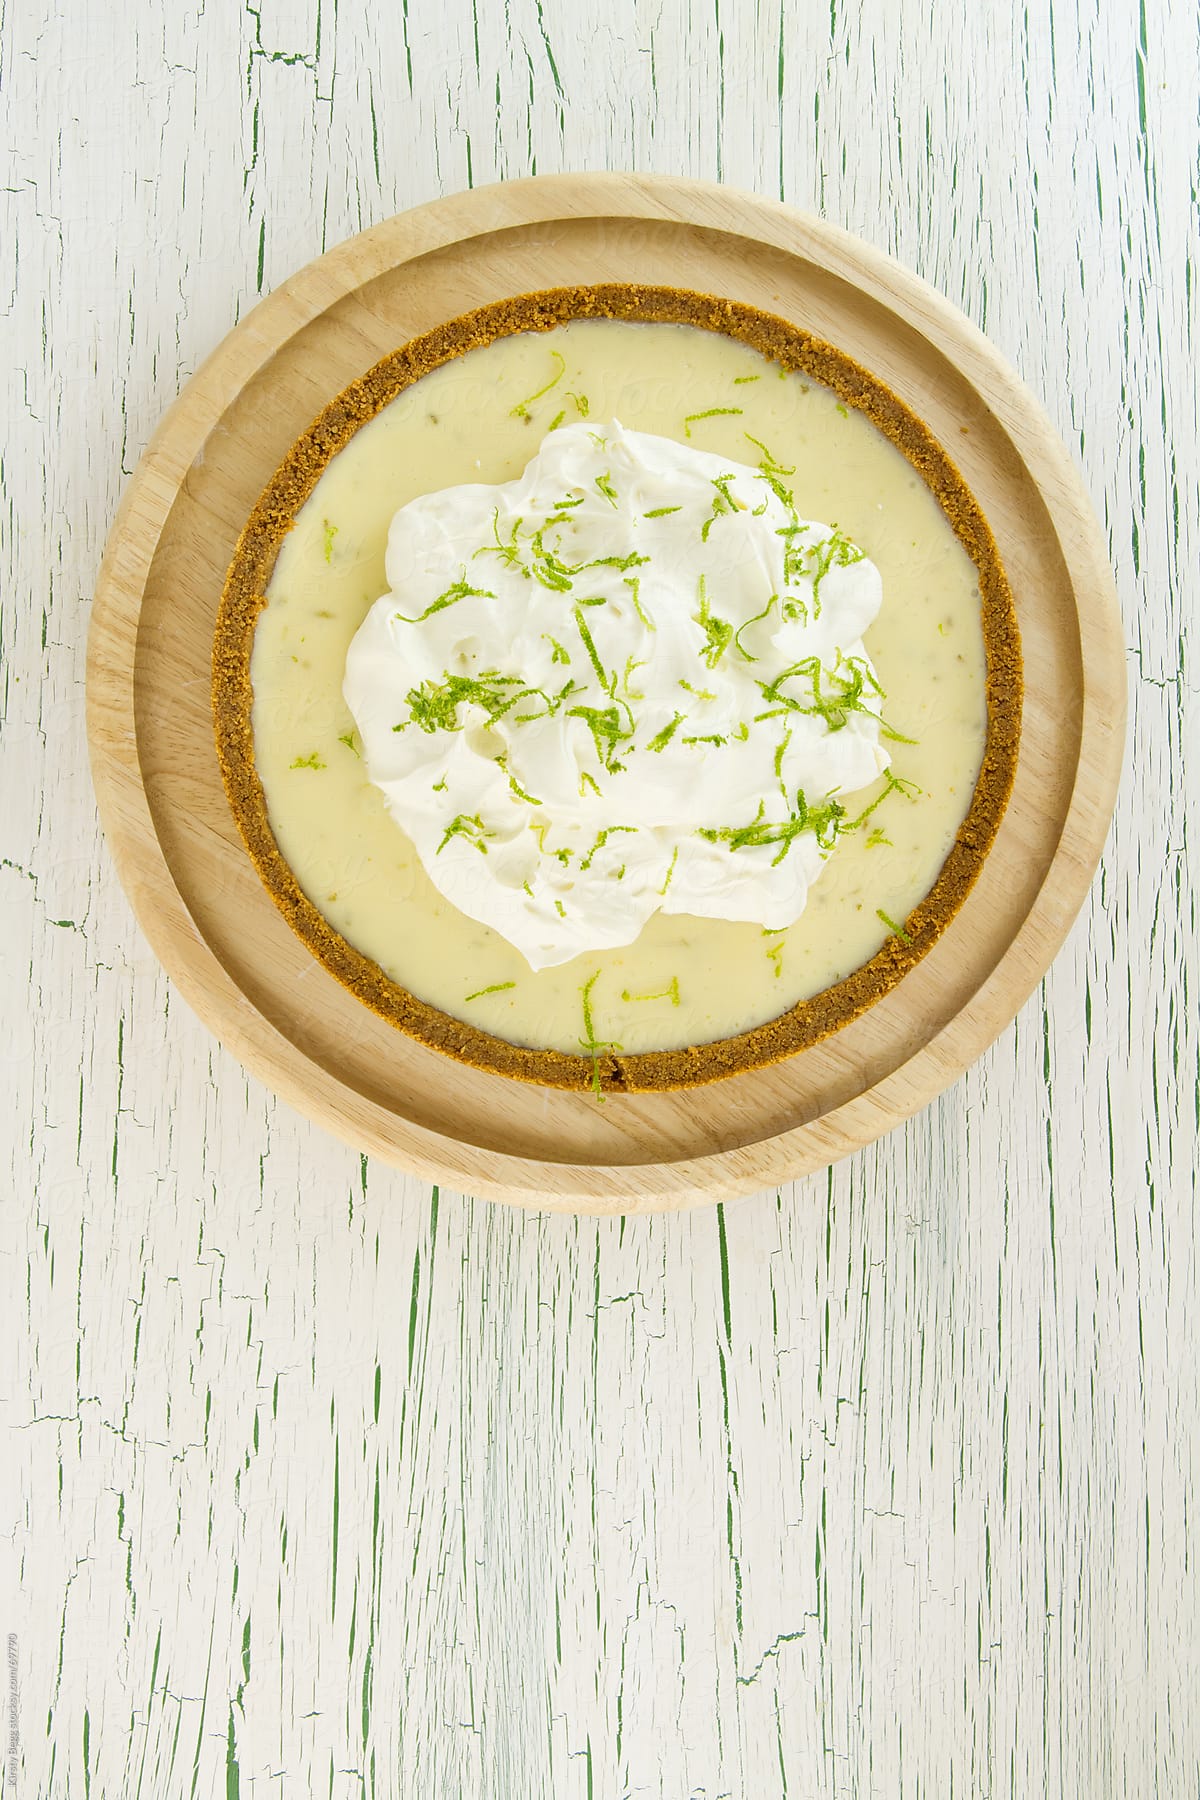 Key Lime Pie with cream and zest